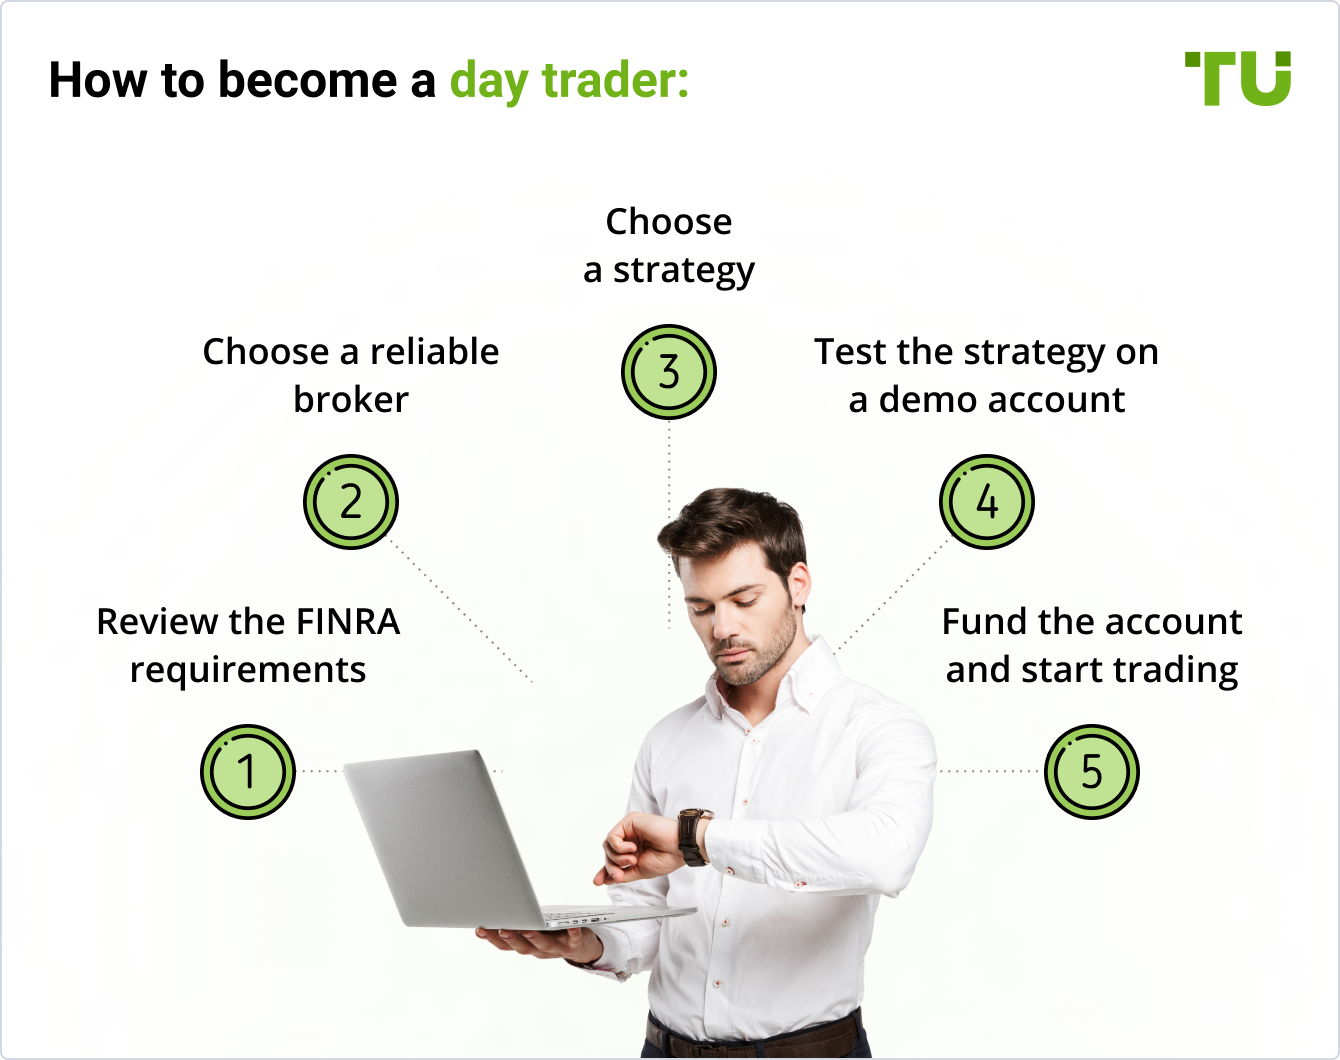 How to become a day trader